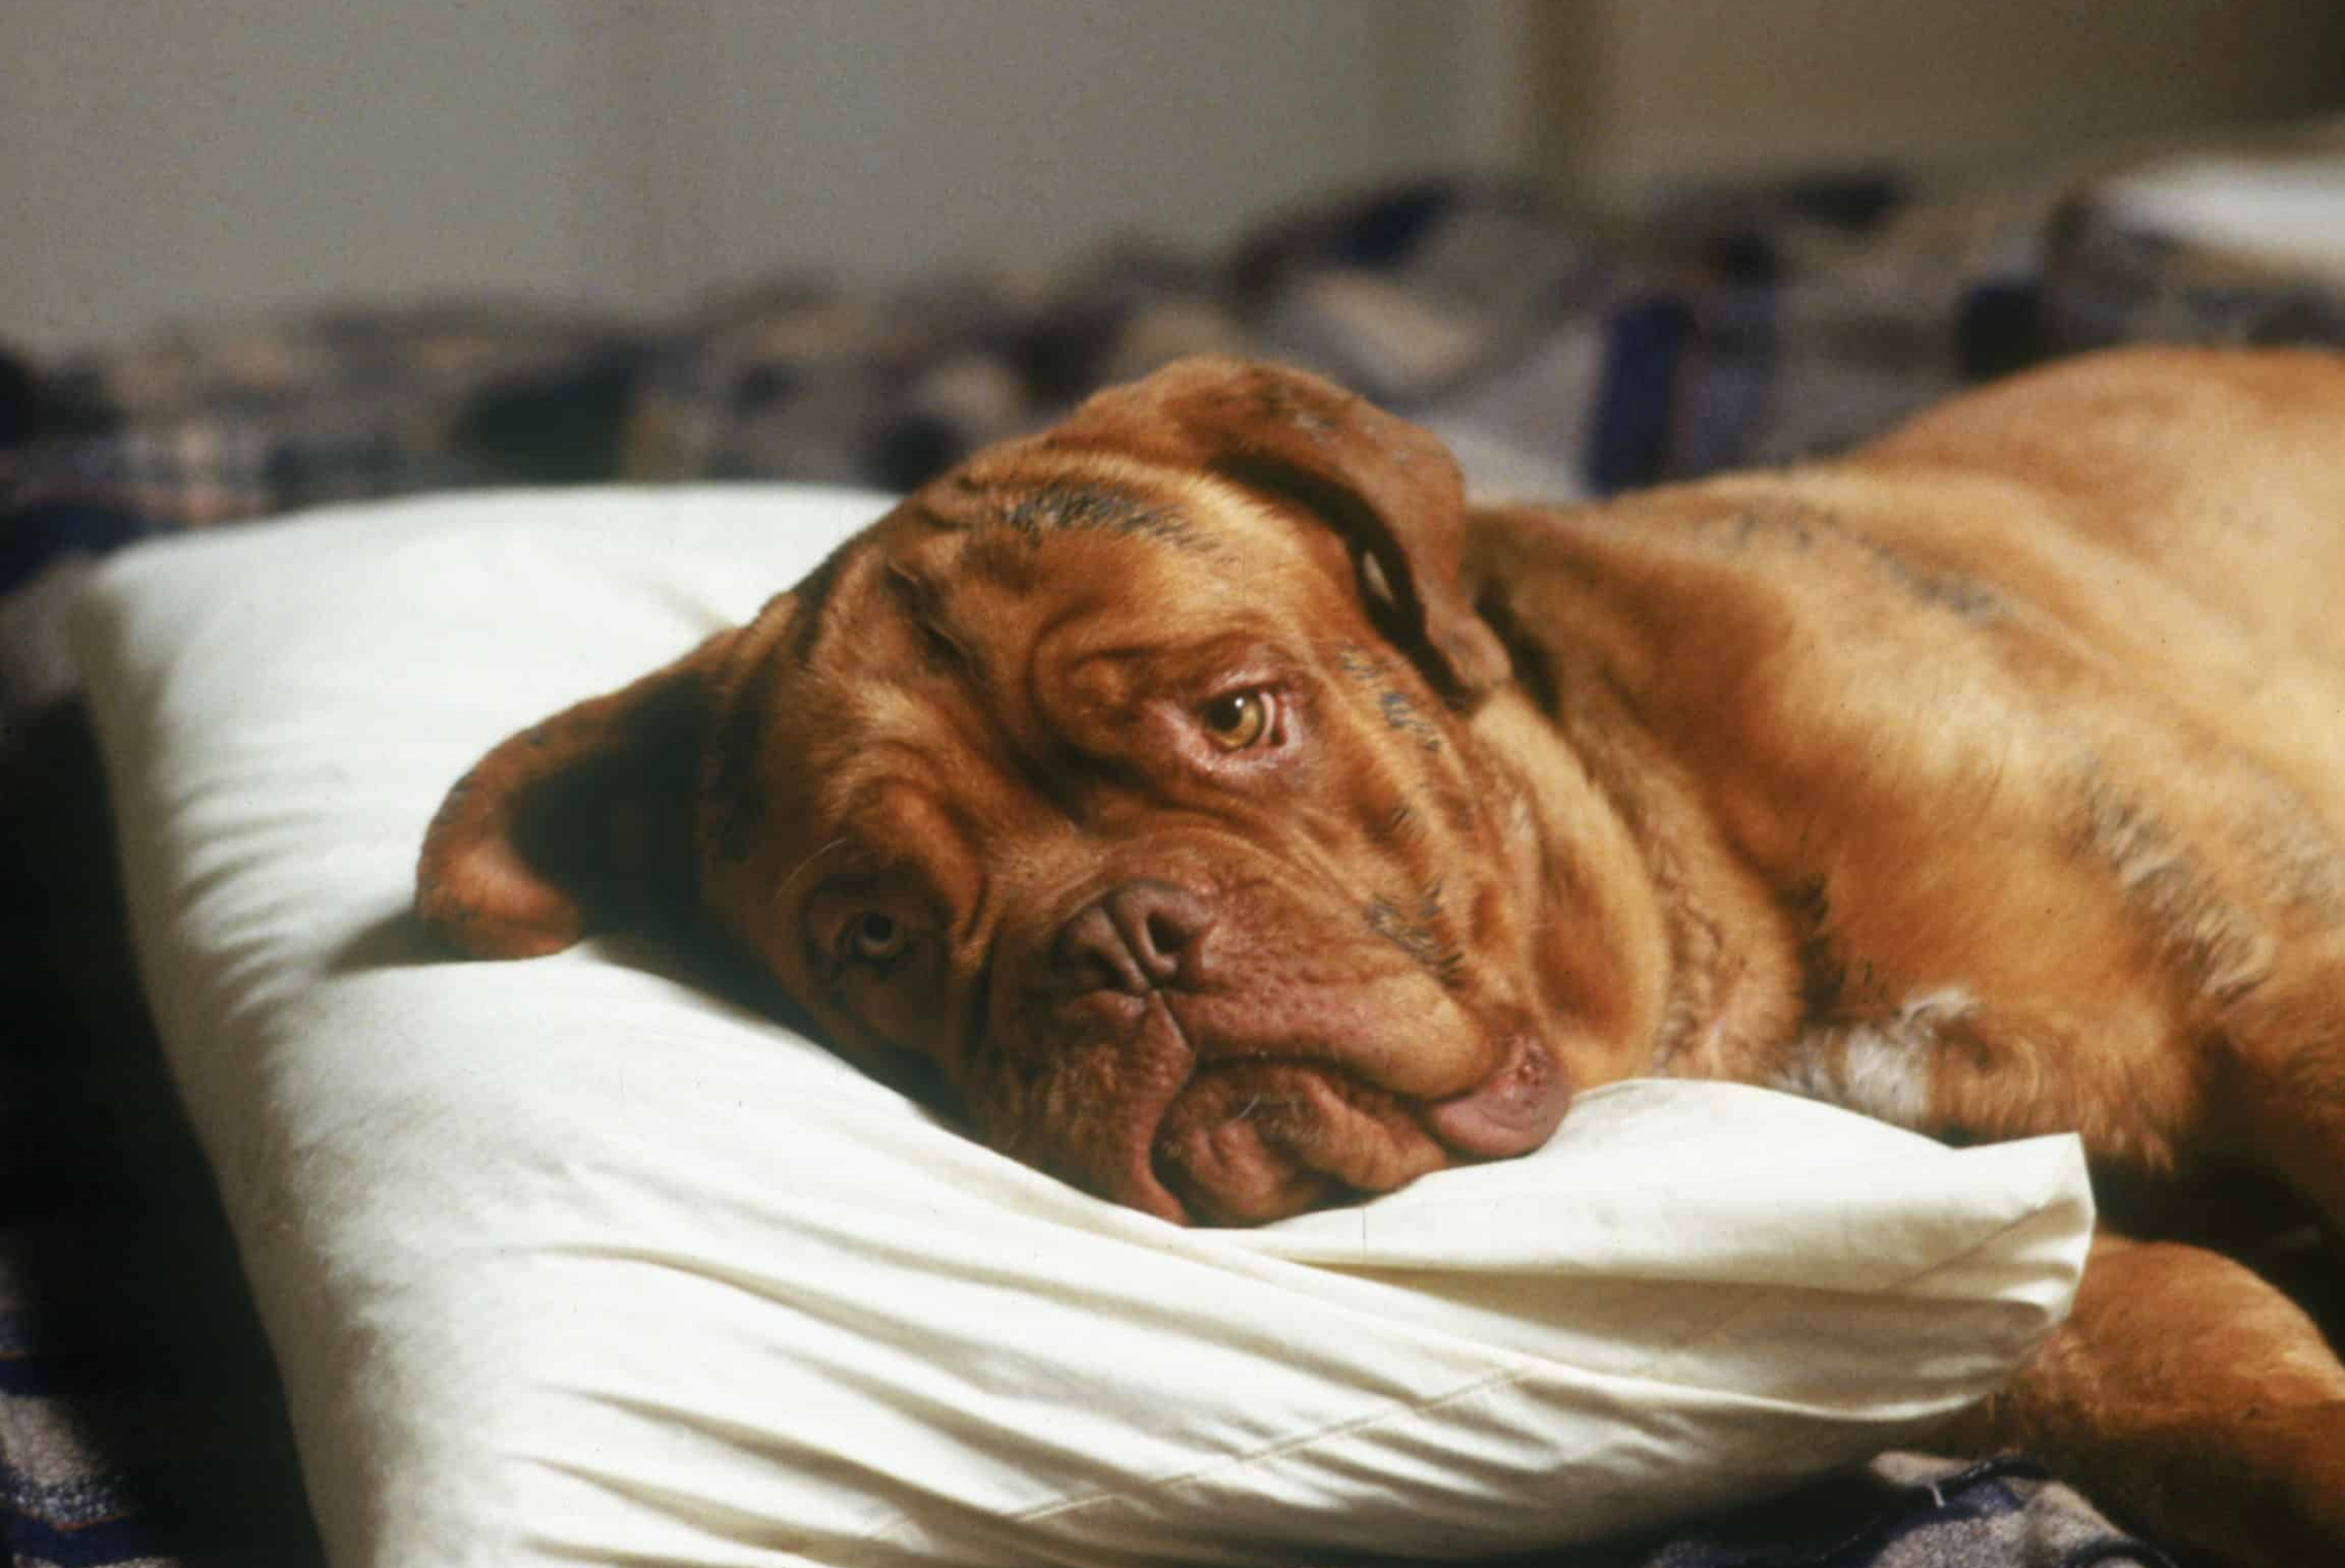 Turner and Hooch: Beasley the Dog, a Dogue de Bordeaux, one of the most ancient French breeds. 2560x1720 HD Wallpaper.